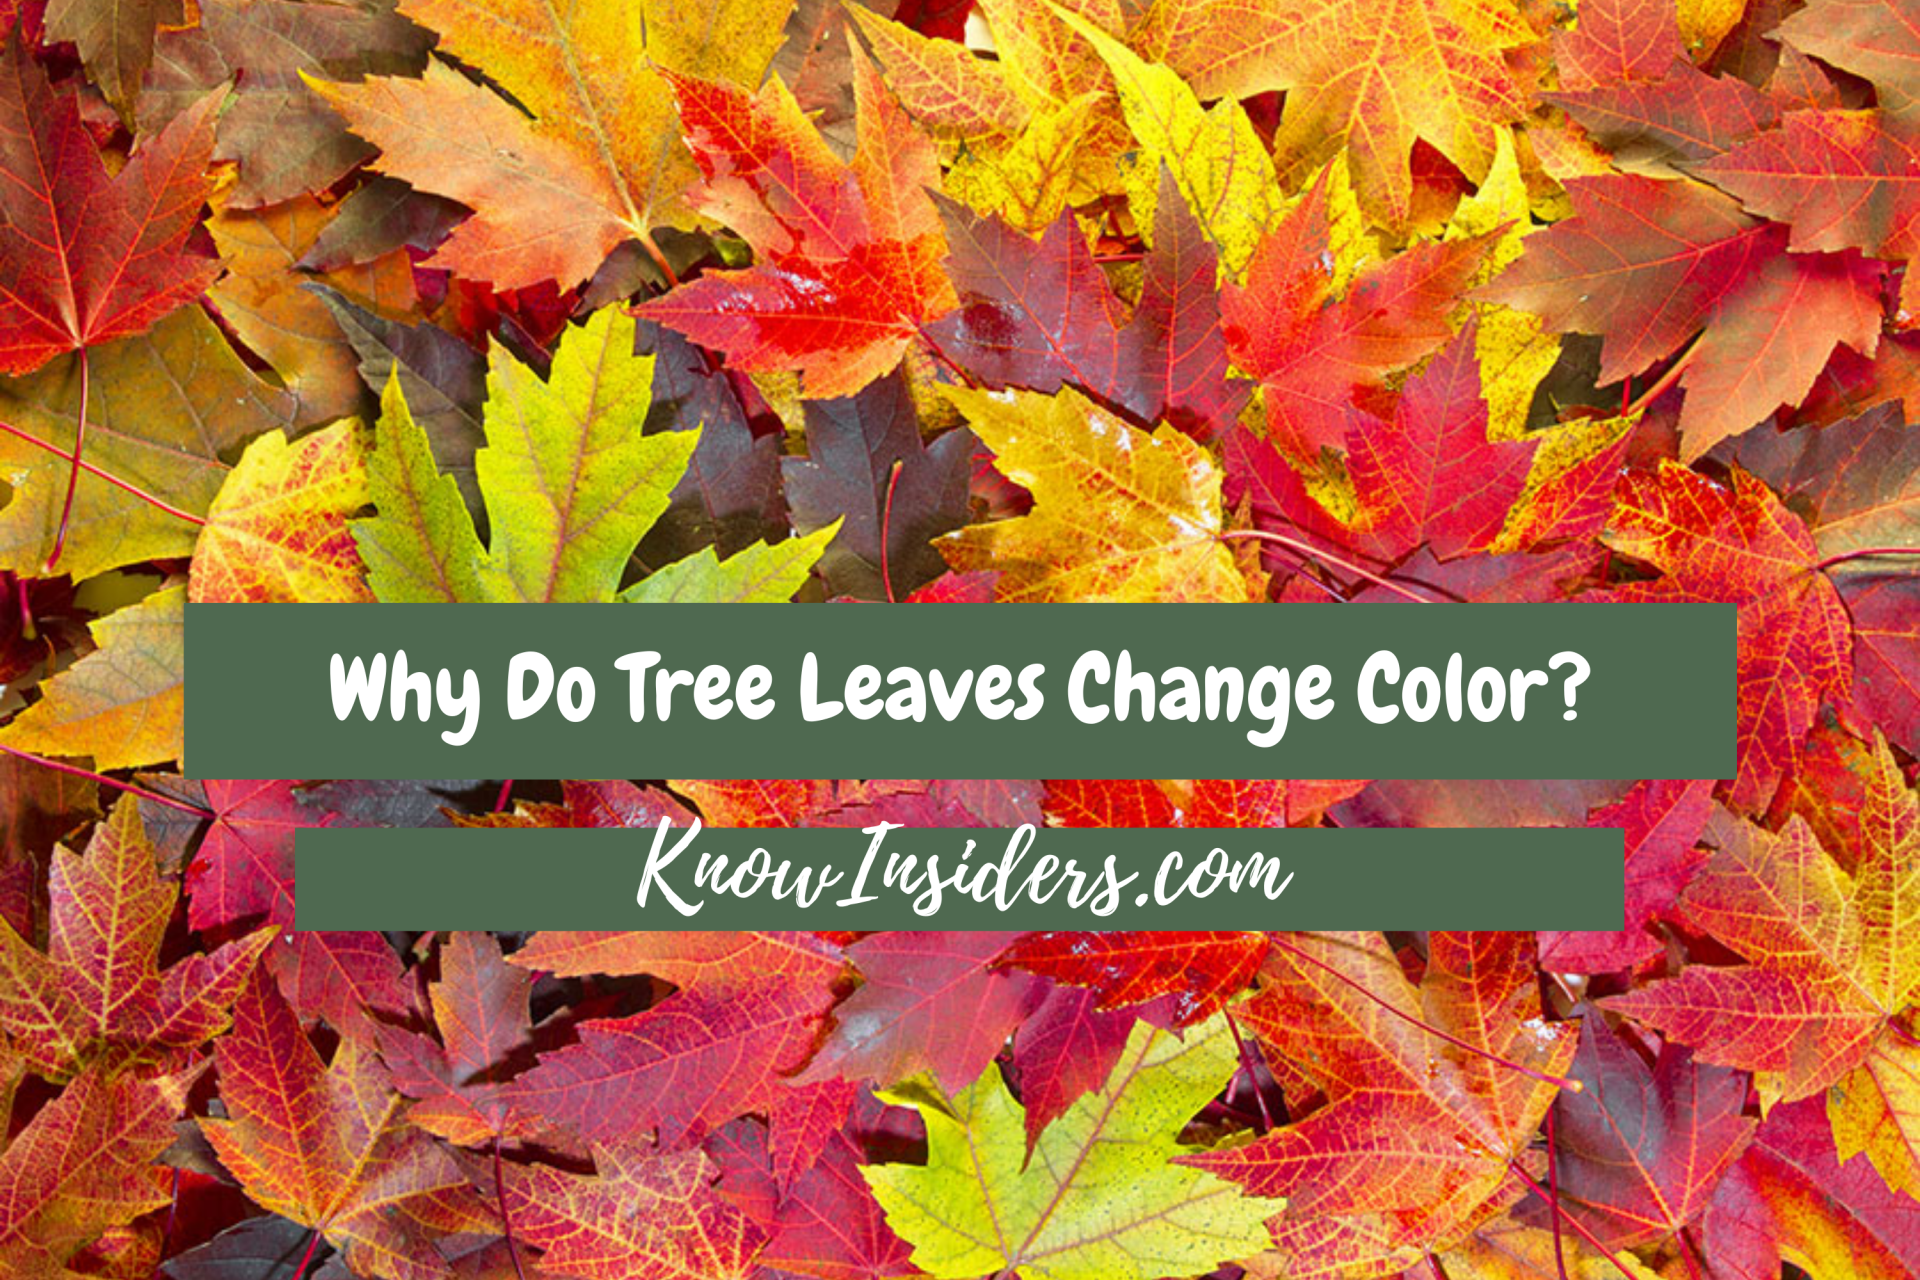 Why Do Tree Leaves Change Color? Which Leads to The Change?